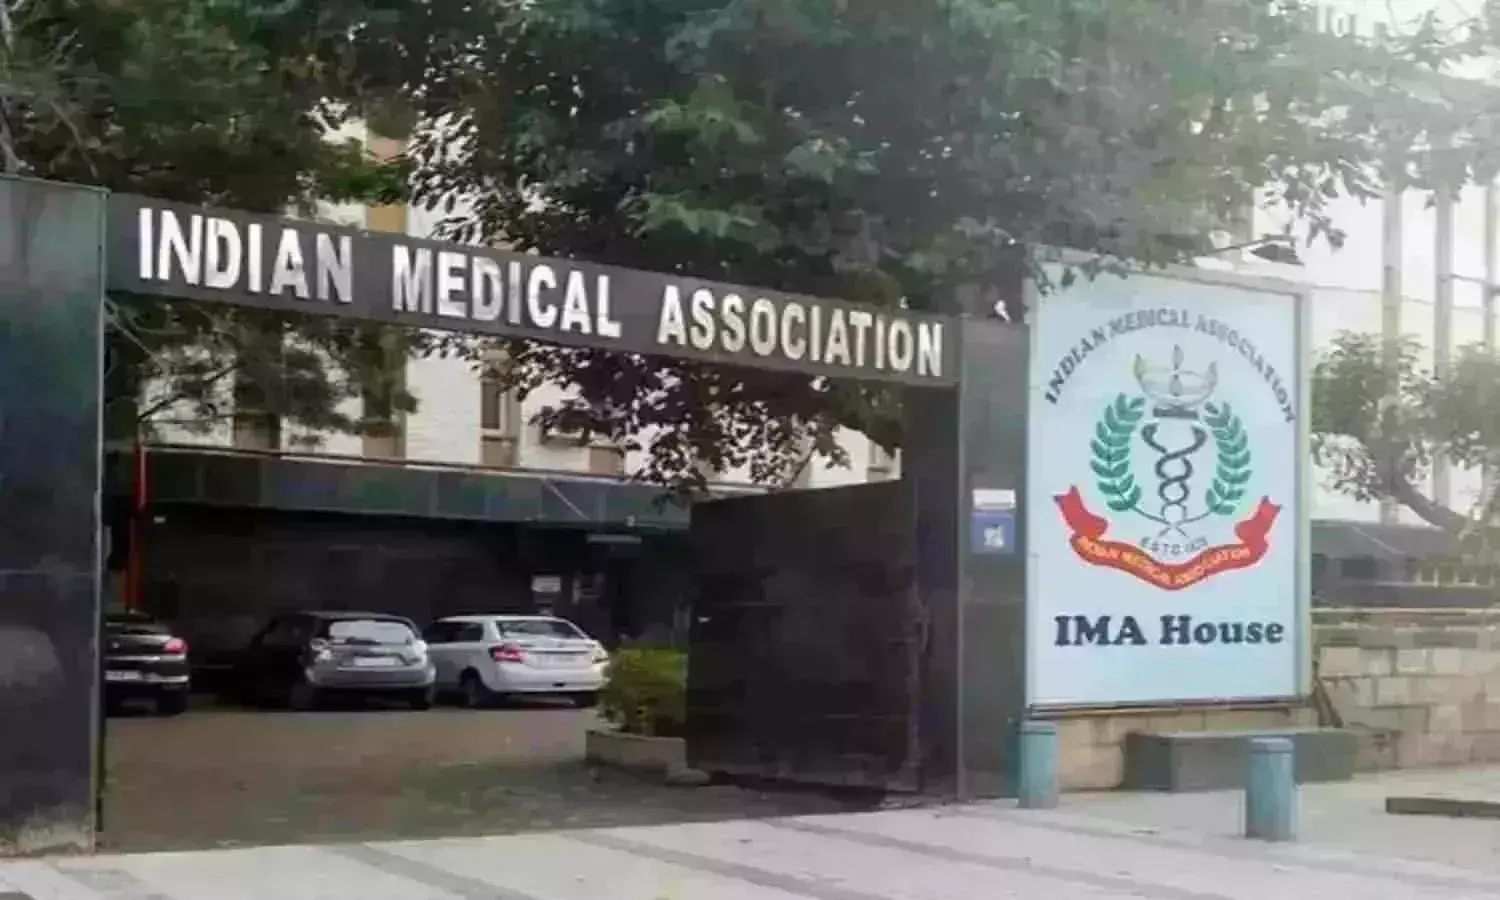 How can doctor be suspended for Shortage of medicines at Govt Hospital, questions IMA